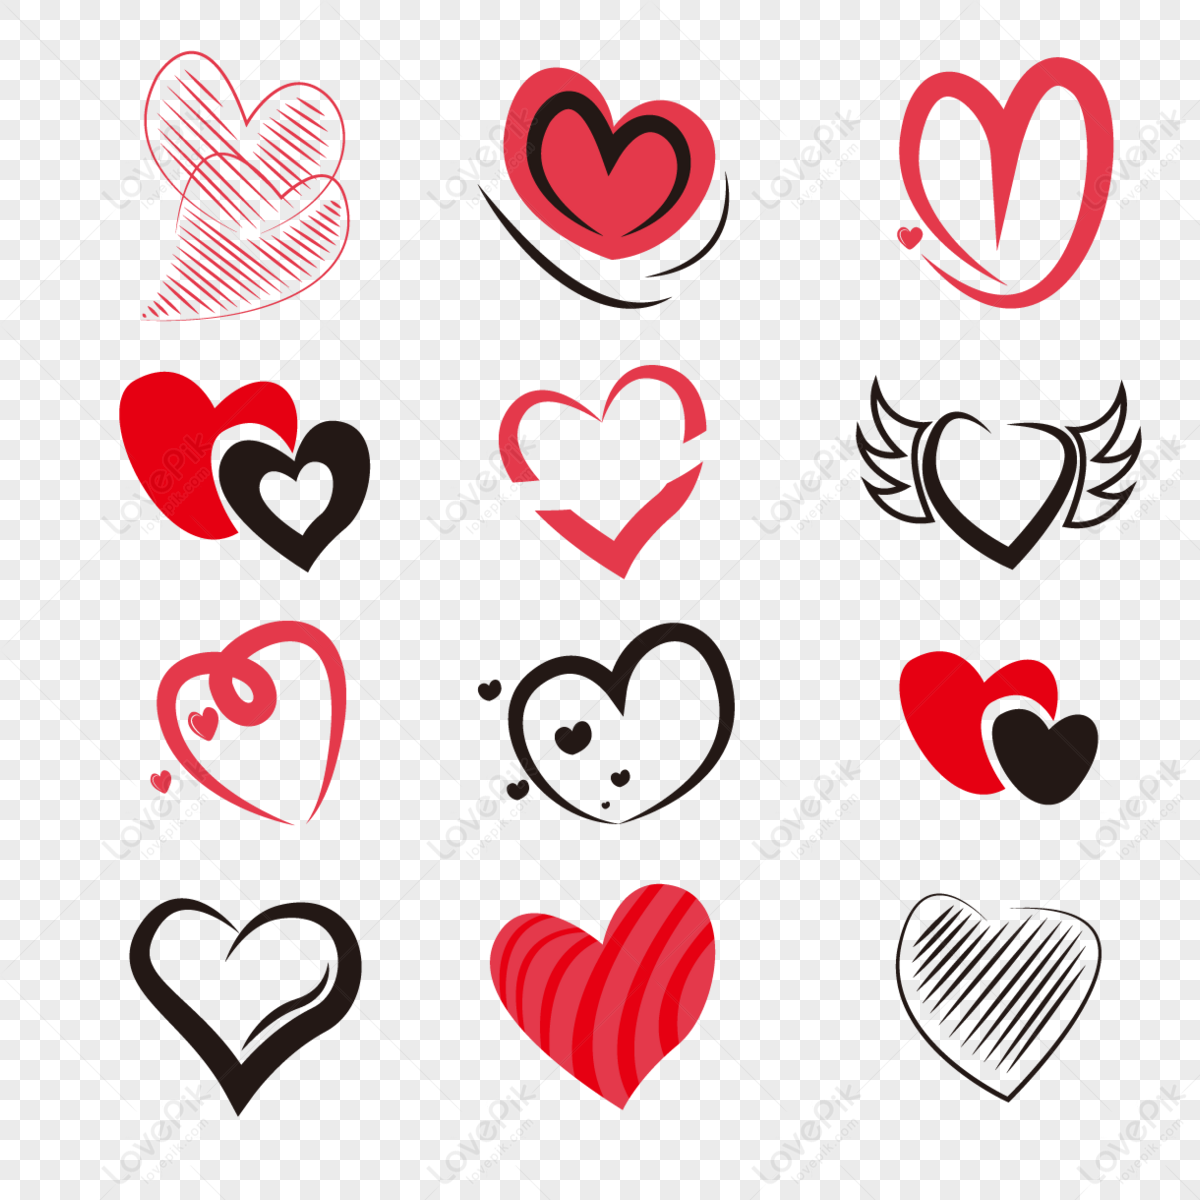 Original Icon Images, HD Pictures For Free Vectors Download - Lovepik.com